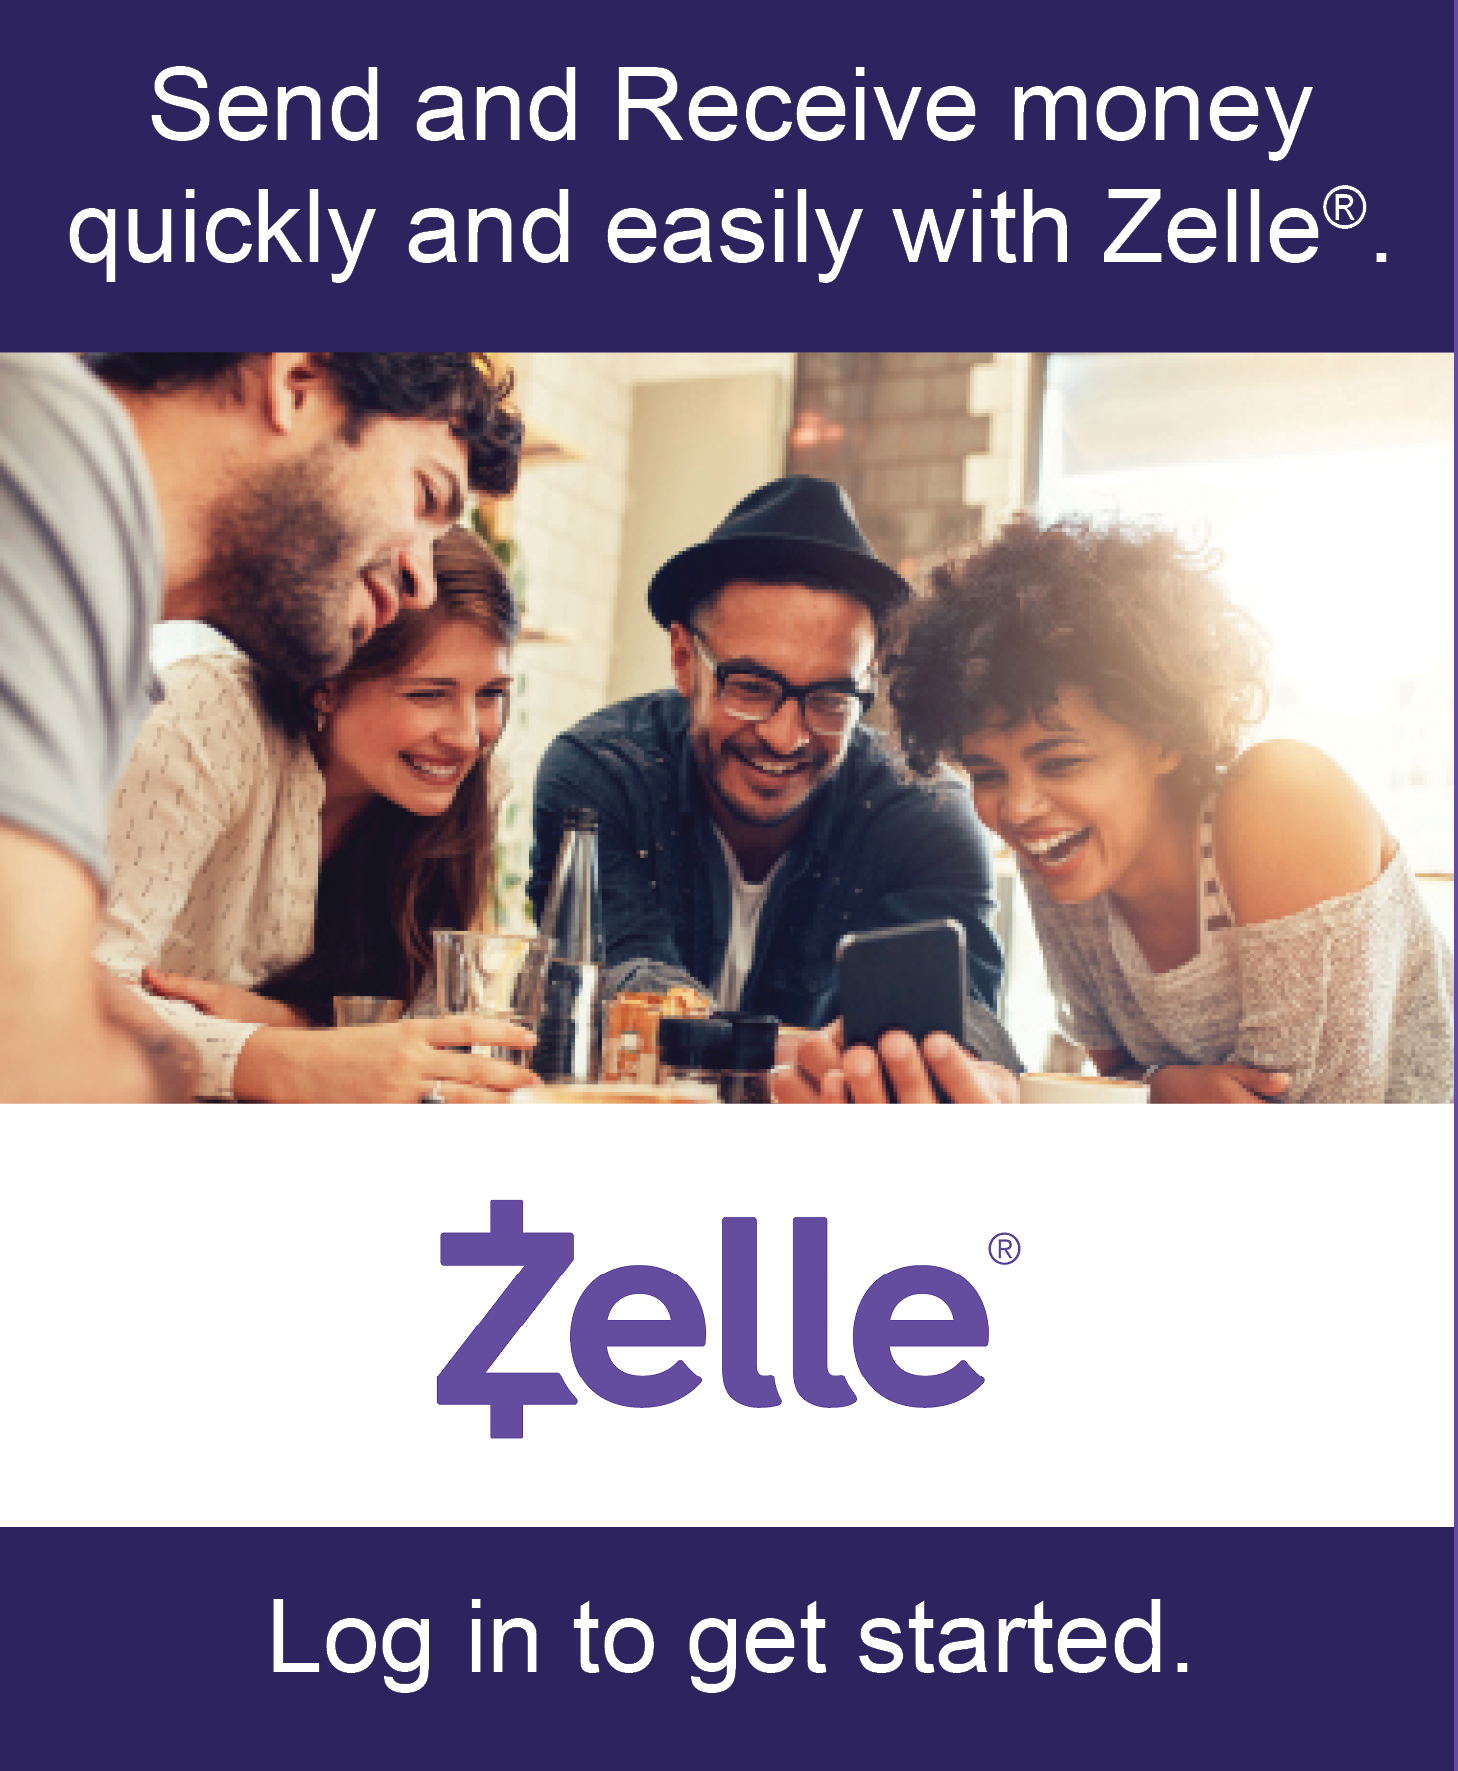 Image of a group of friends with the text send and receive money quickly and easily with Zelle